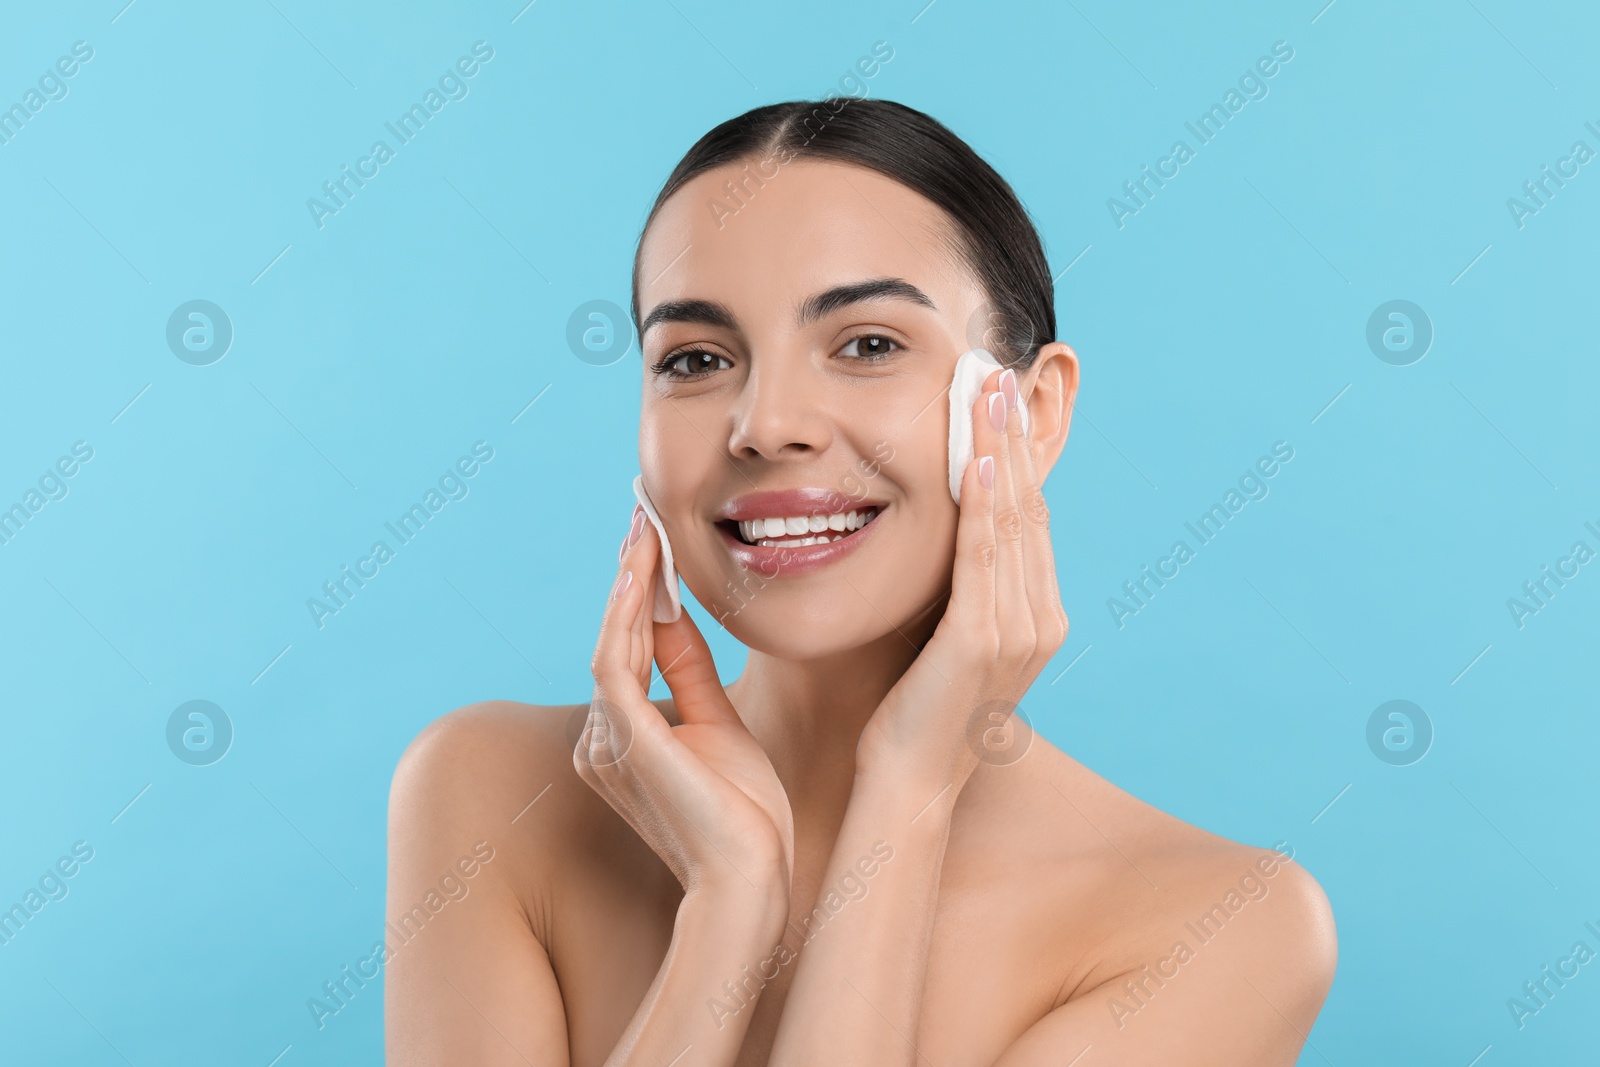 Photo of Beautiful woman removing makeup with cotton pads on light blue background